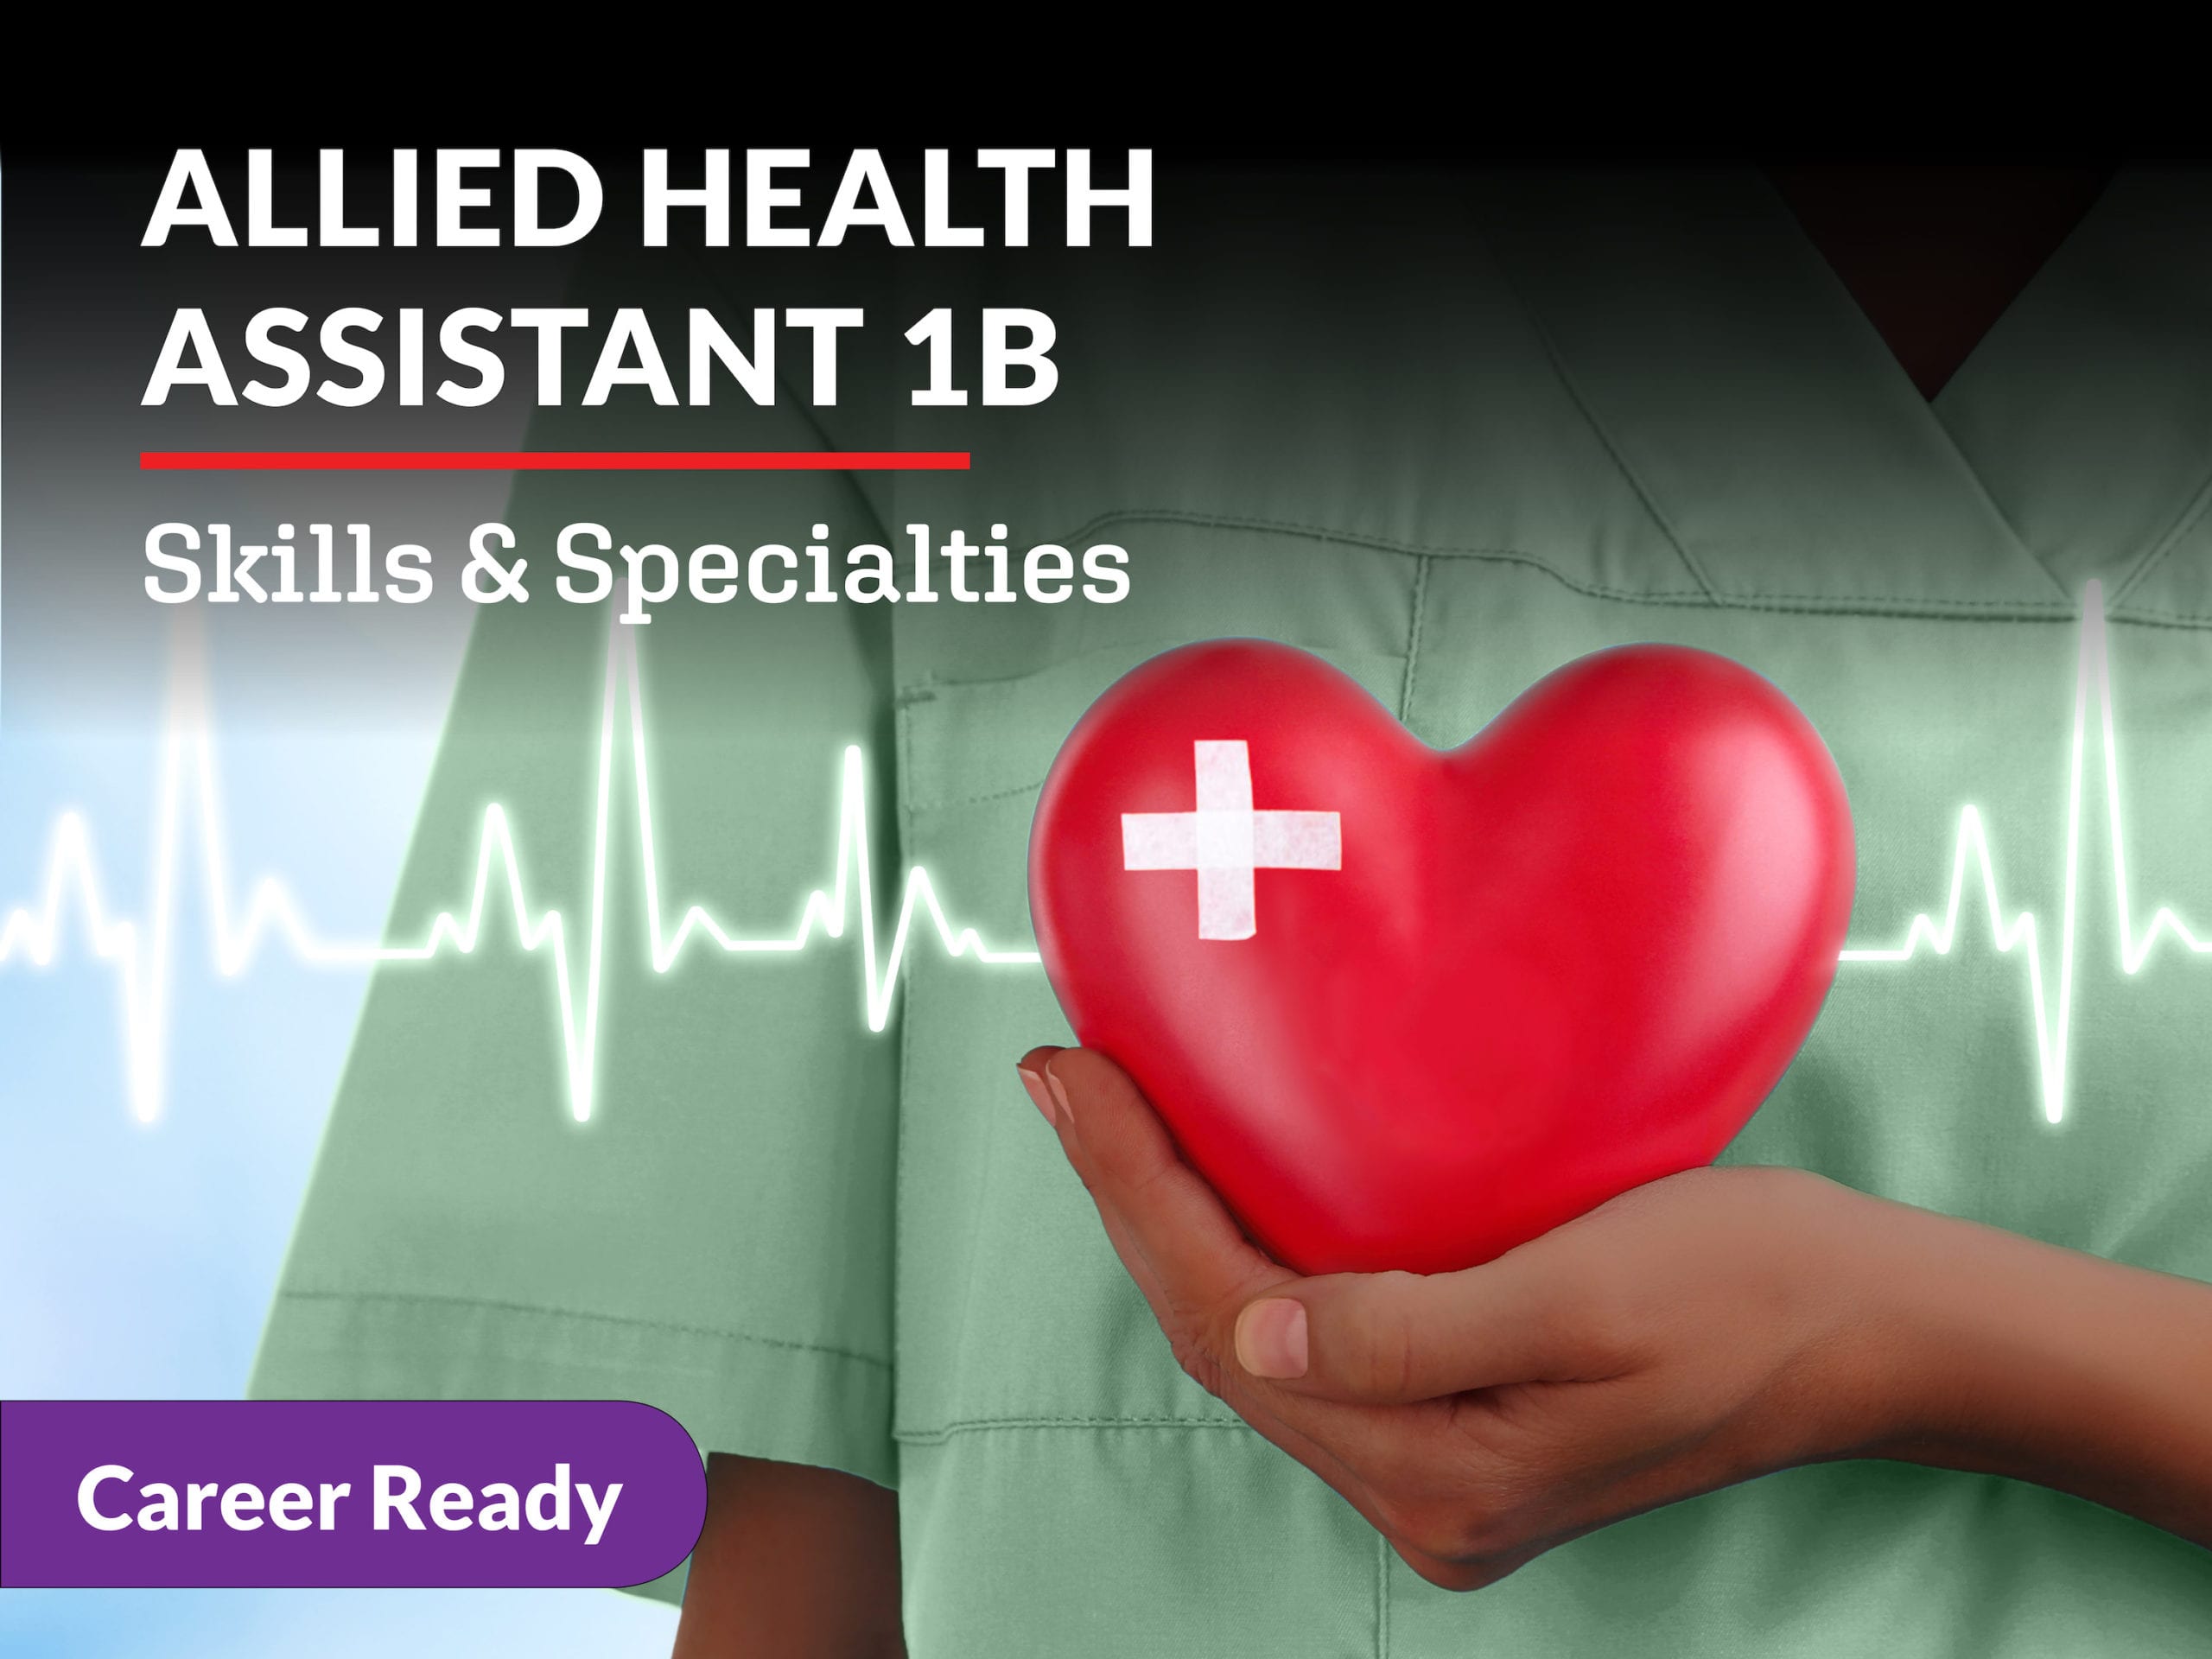 Allied Health Assistant 1b: Skills and Specialities